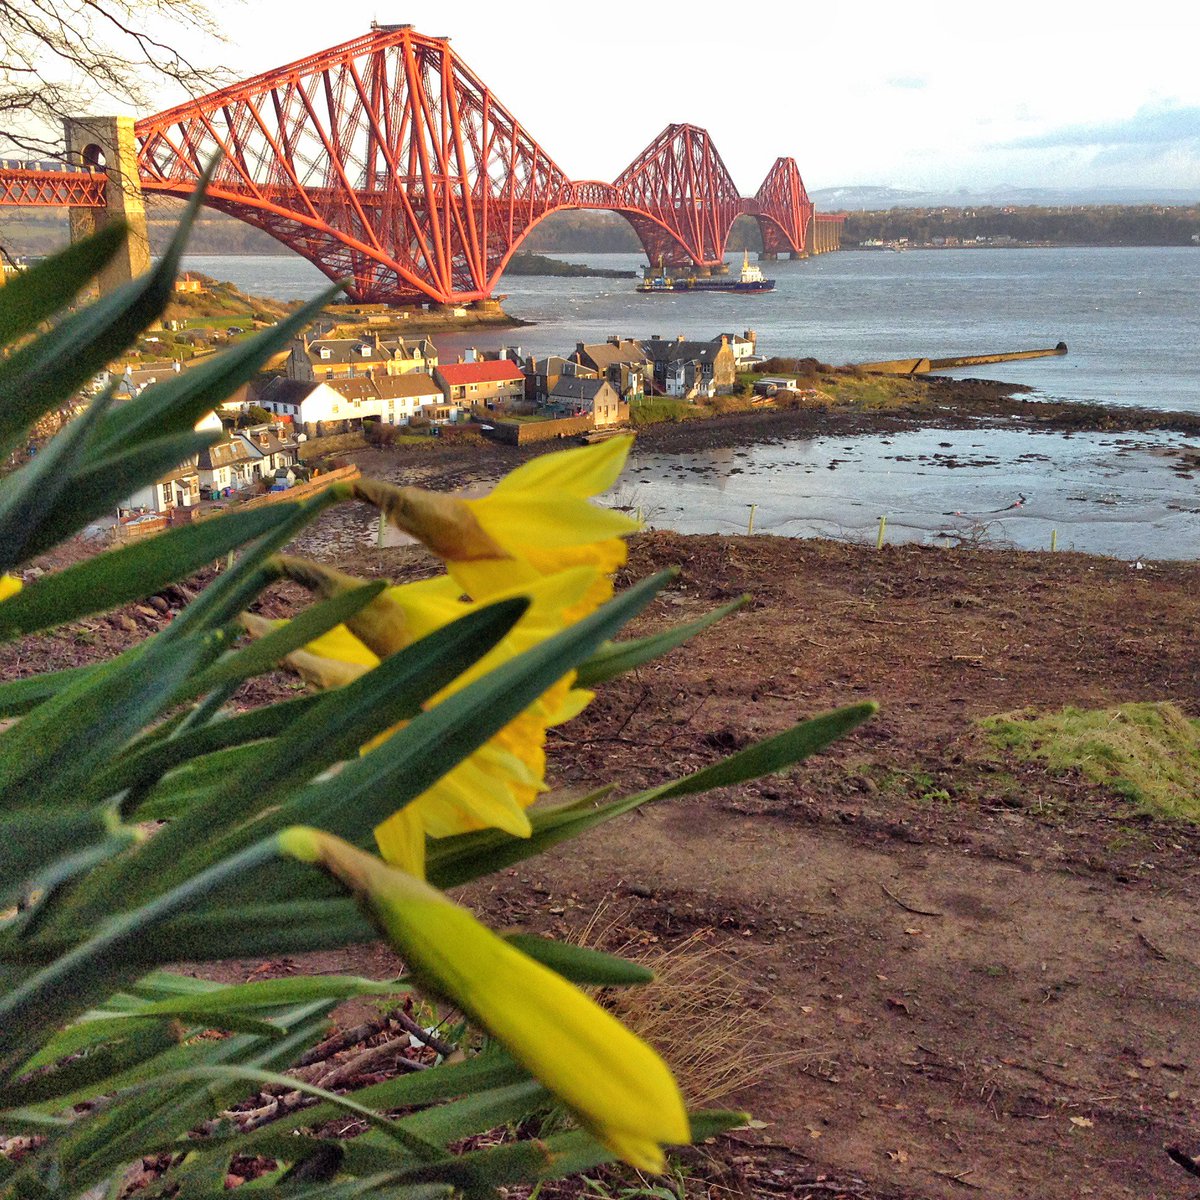 First day #SpringEquinox  and Northcliff's 1st daffodils are appearing. A great contrast against the red rail bridge @FRC_Queensferry @VisitScotland @VisitFife @LoveDunfermline @WhatsonFife @TheForthBridges @ForthBridges When we say we are close to the bridges, we mean it!